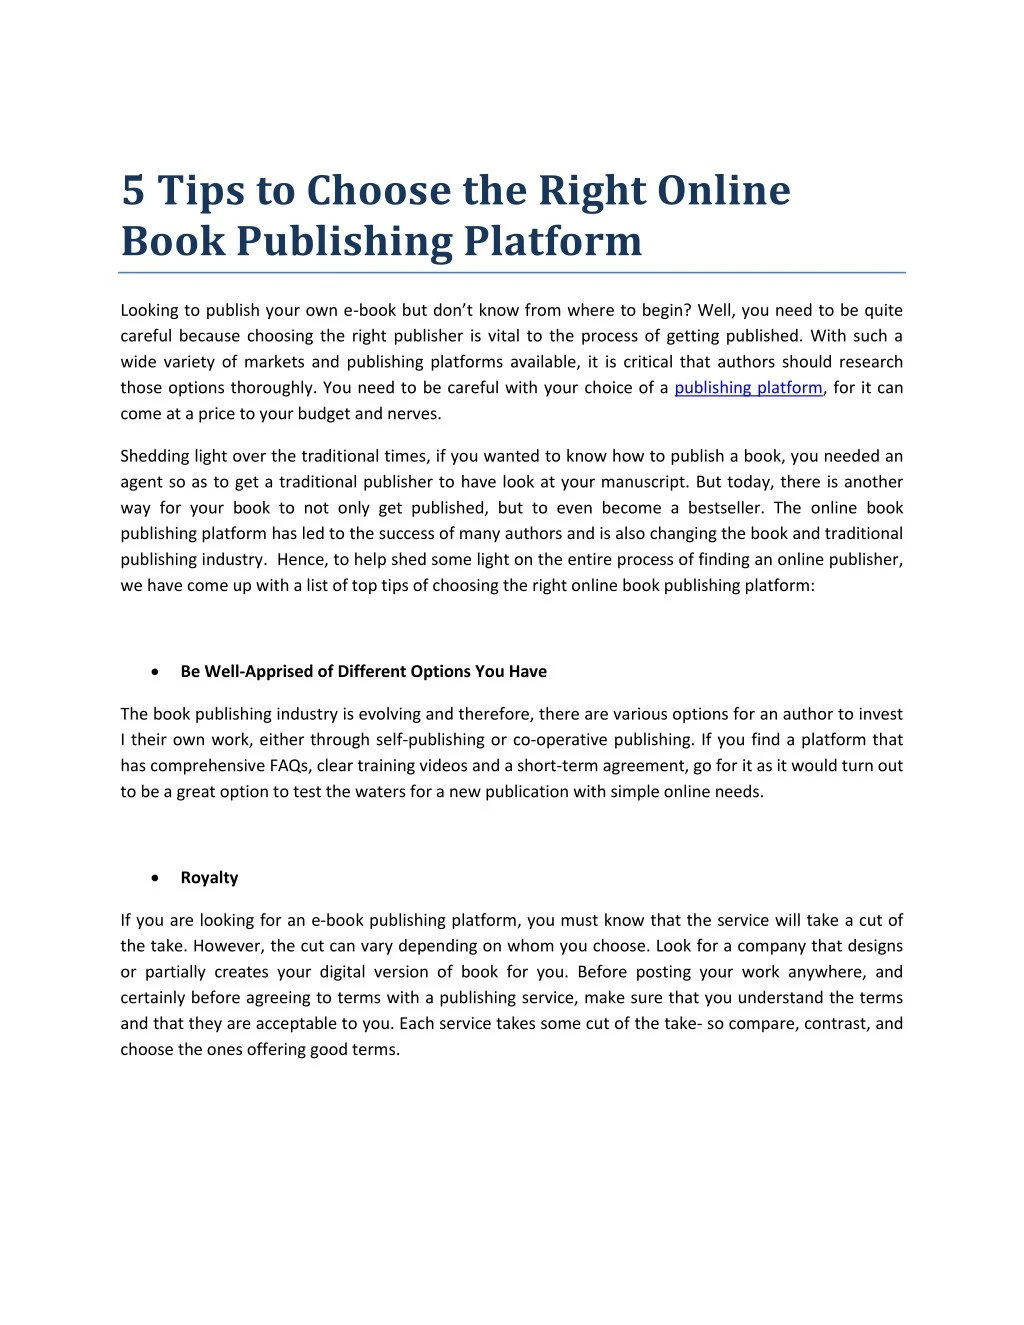 5 tips to choose the right online book publishing